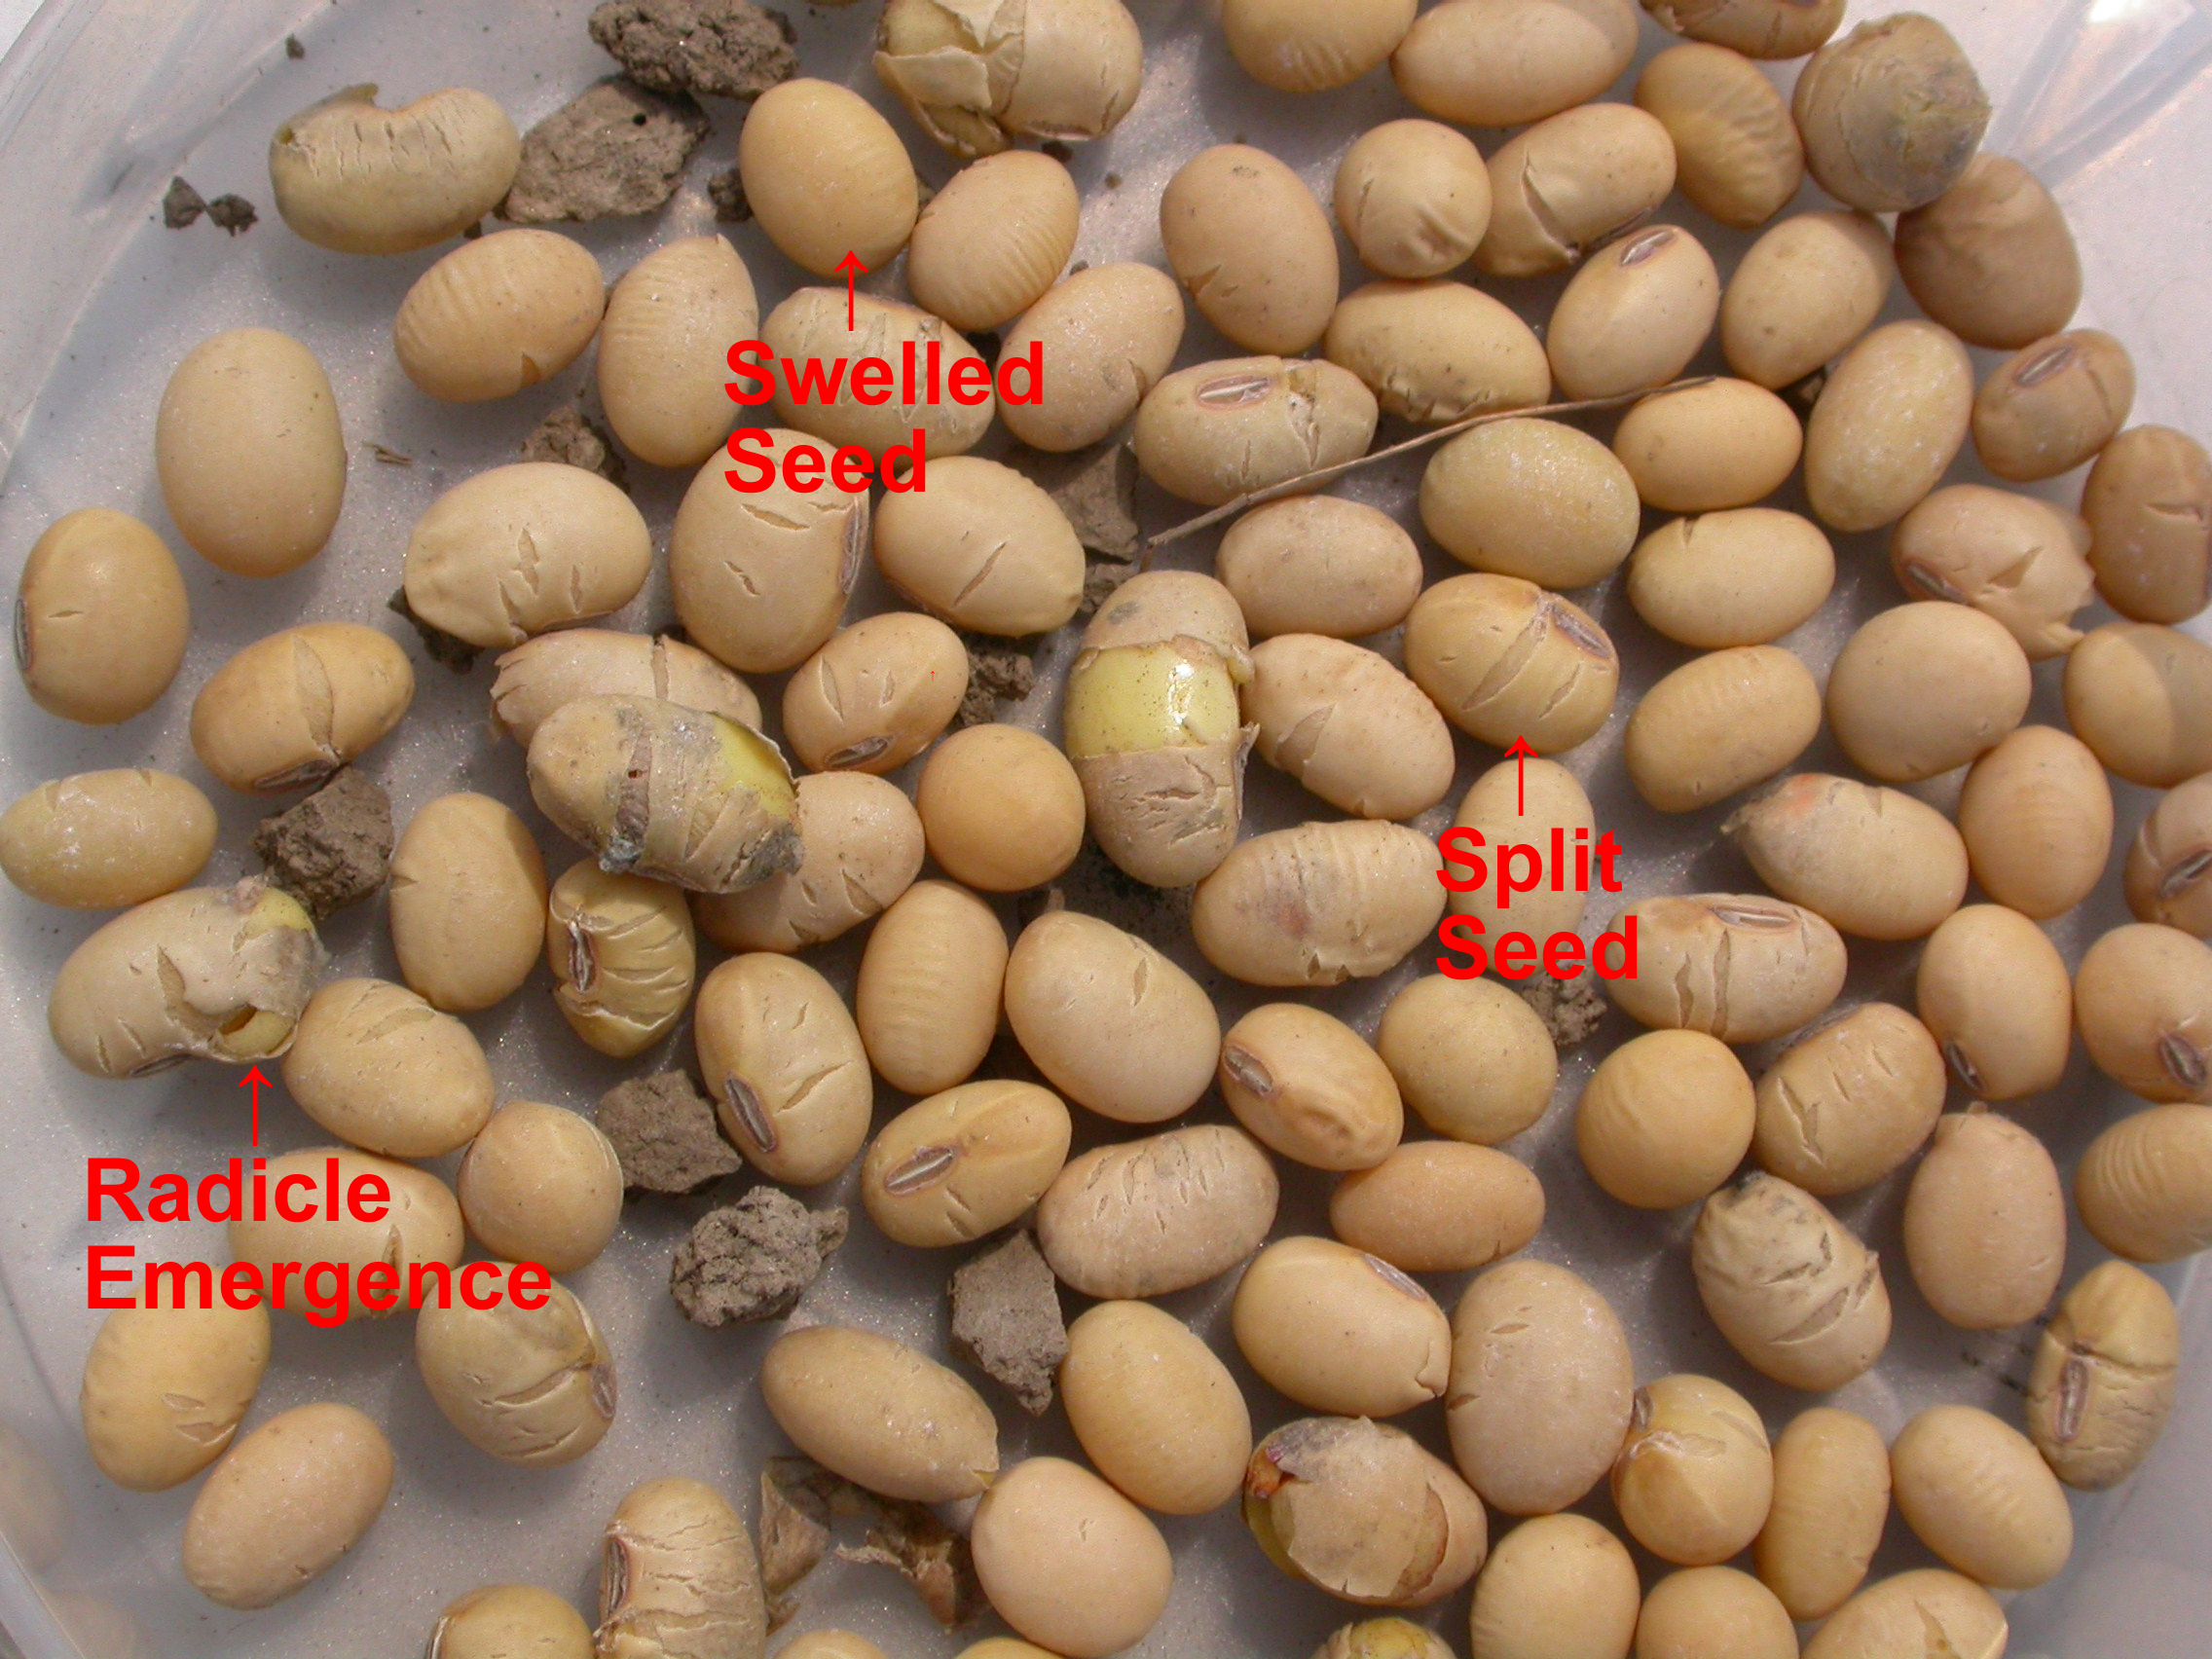 Various stages of soybean seed imbibition.